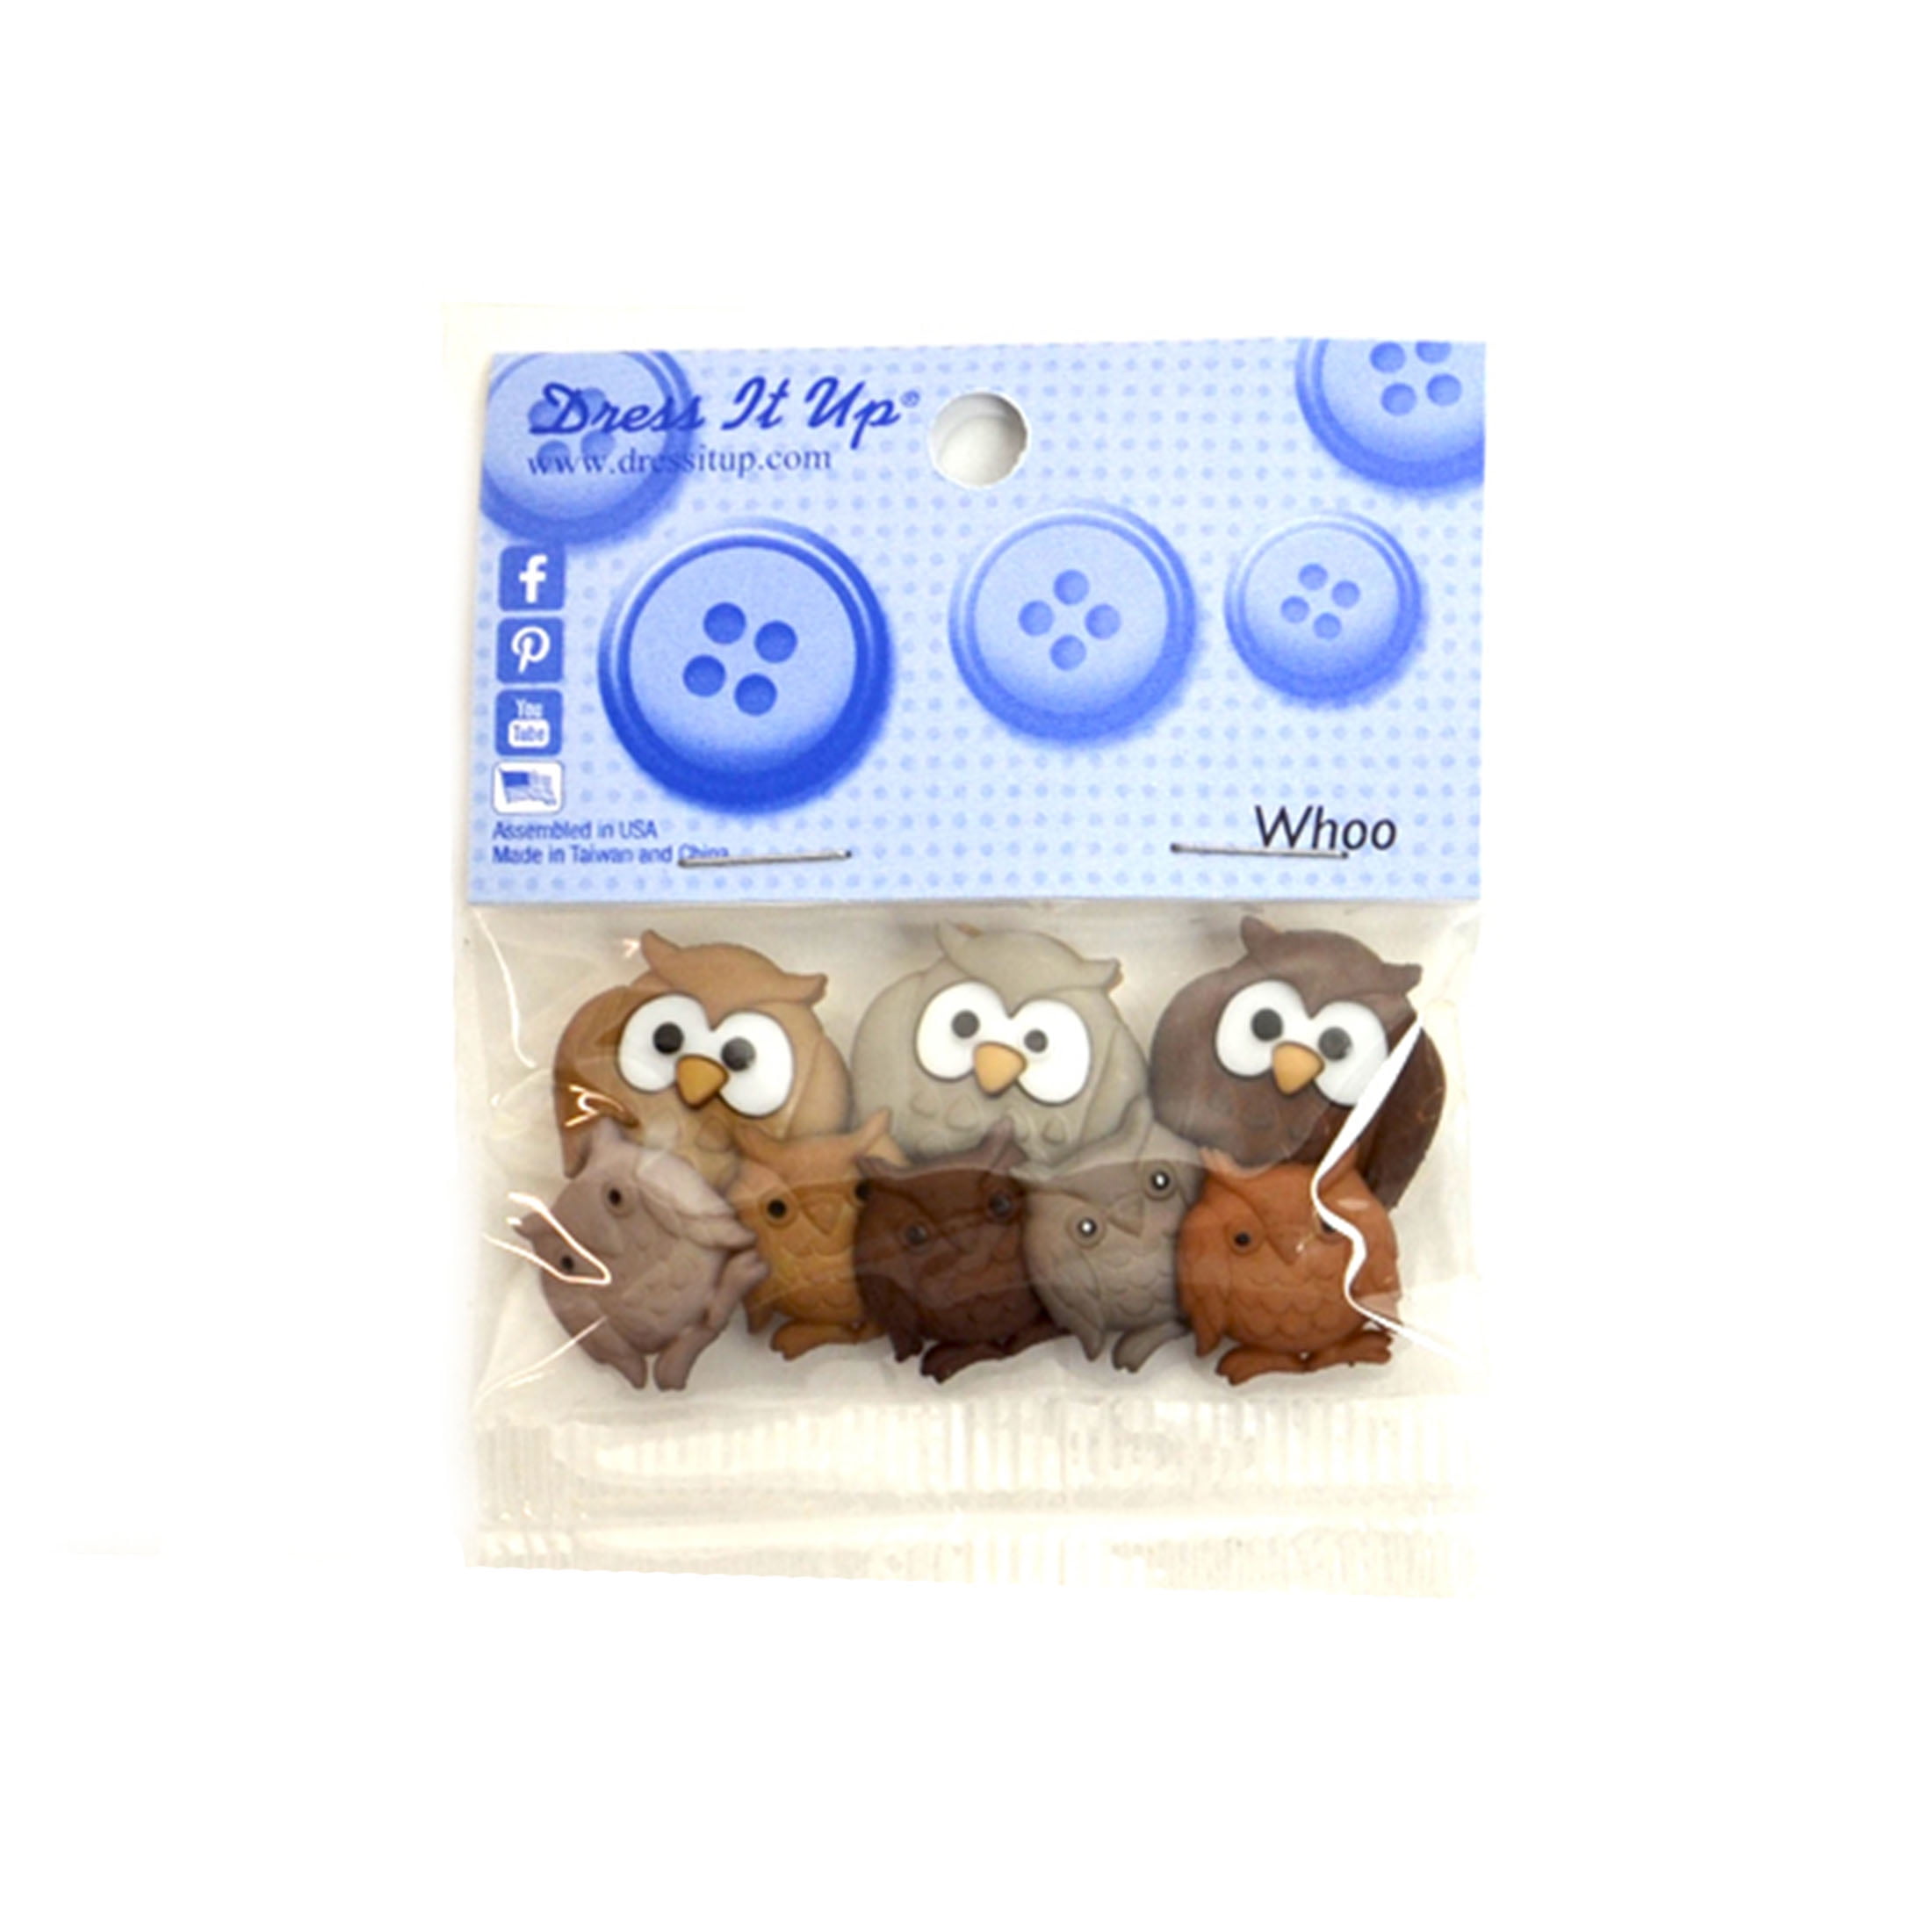 8 SEW CUTE OWLS THEMED NOVELTY SEW THROUGH CRAFT BUTTONS CRAFTS/SEWING 